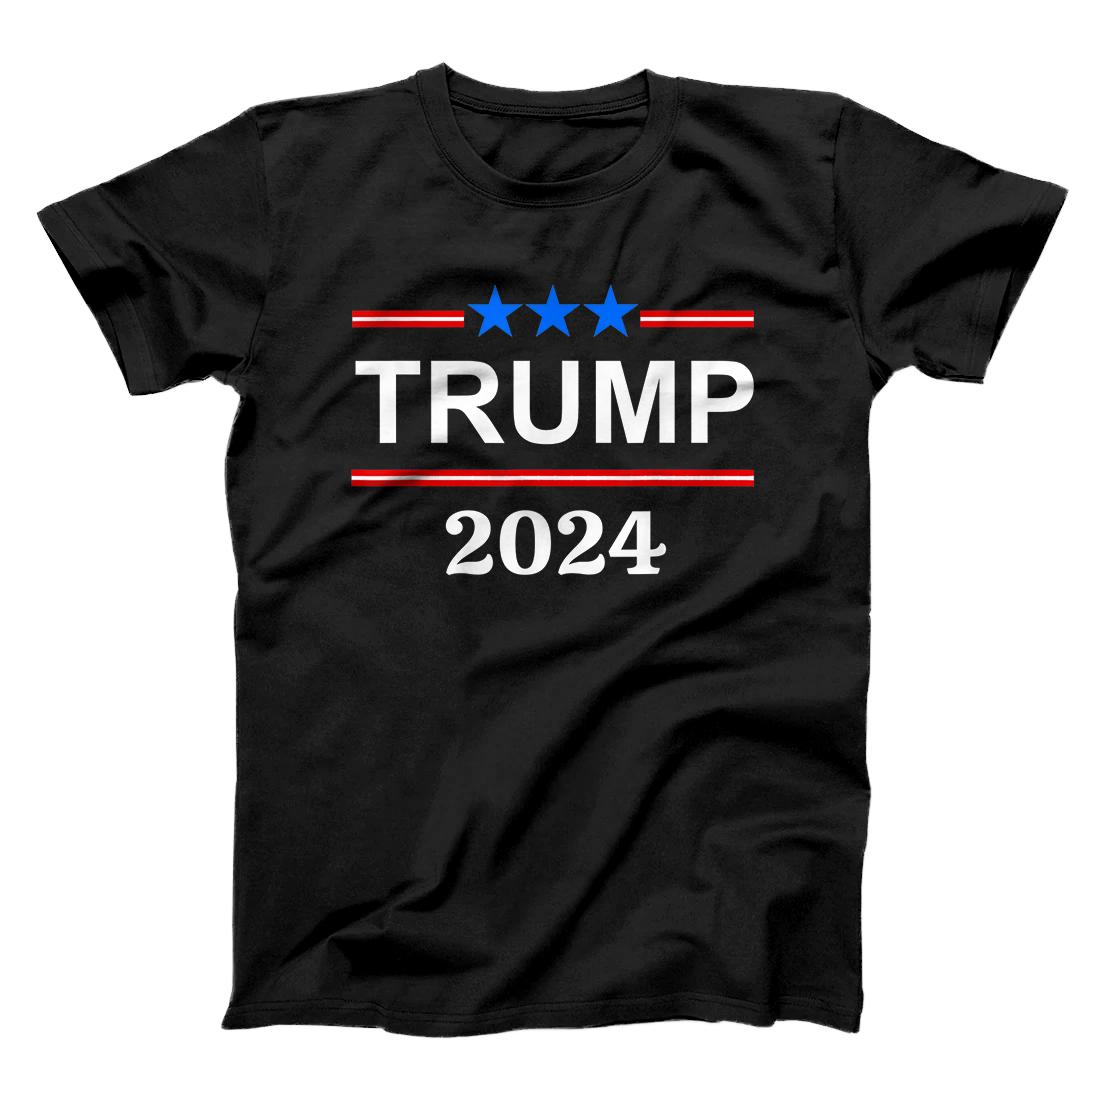 Personalized TRUMP 2024 ELECTION T-Shirt